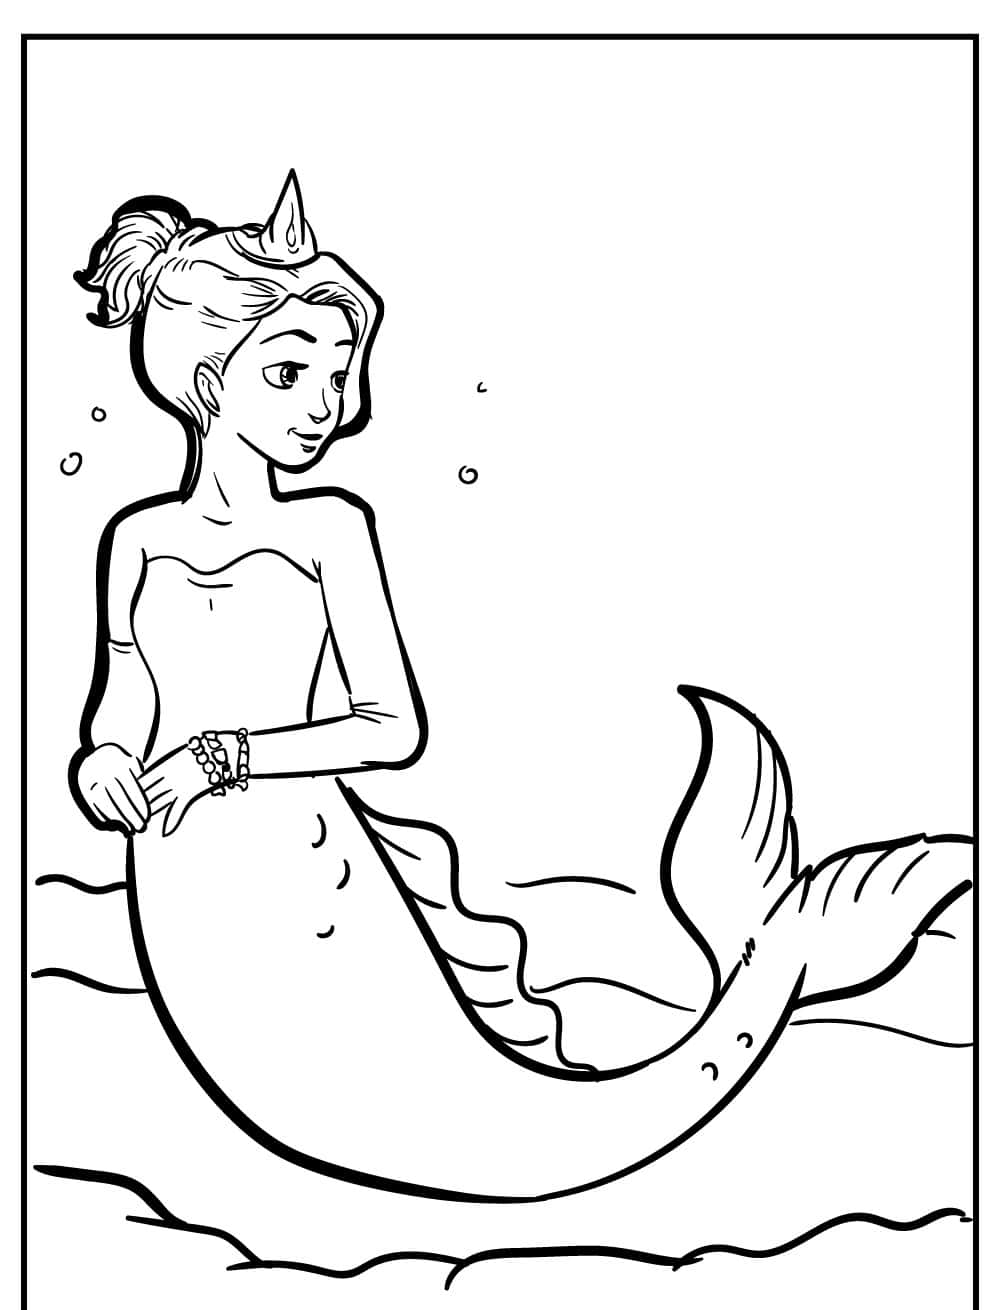 A Mermaid Coloring Page With A Princess